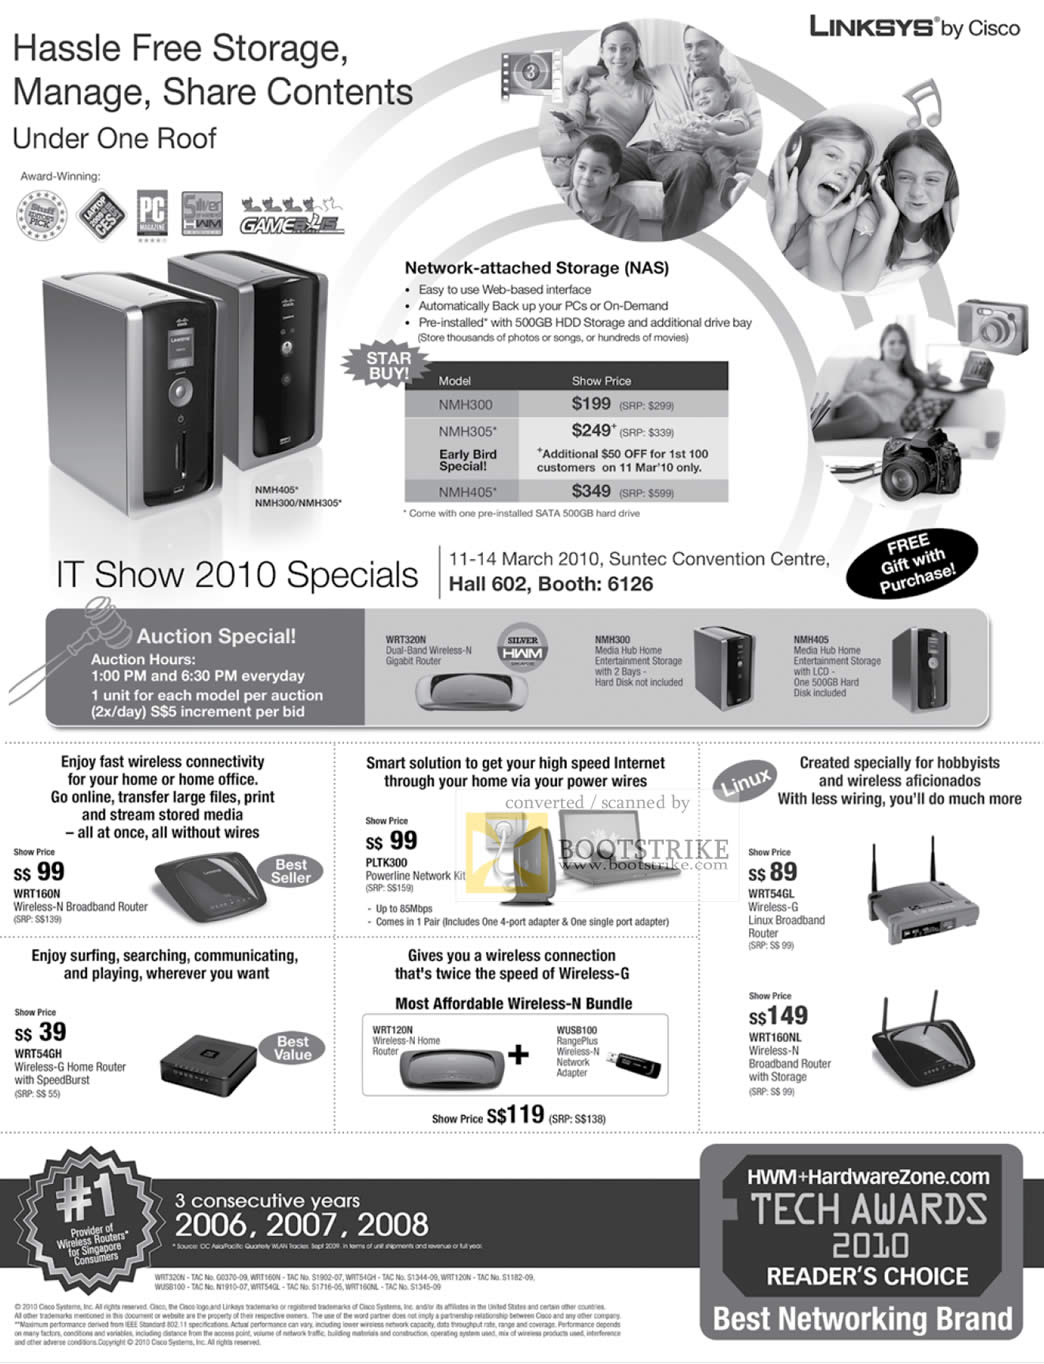 IT Show 2010 price list image brochure of Linksys NAS NMH405 NMH300 NMH305 Router WRT160N Powerline PLTK300 WRT54GH WRT54GL WRT160NL Wireless N